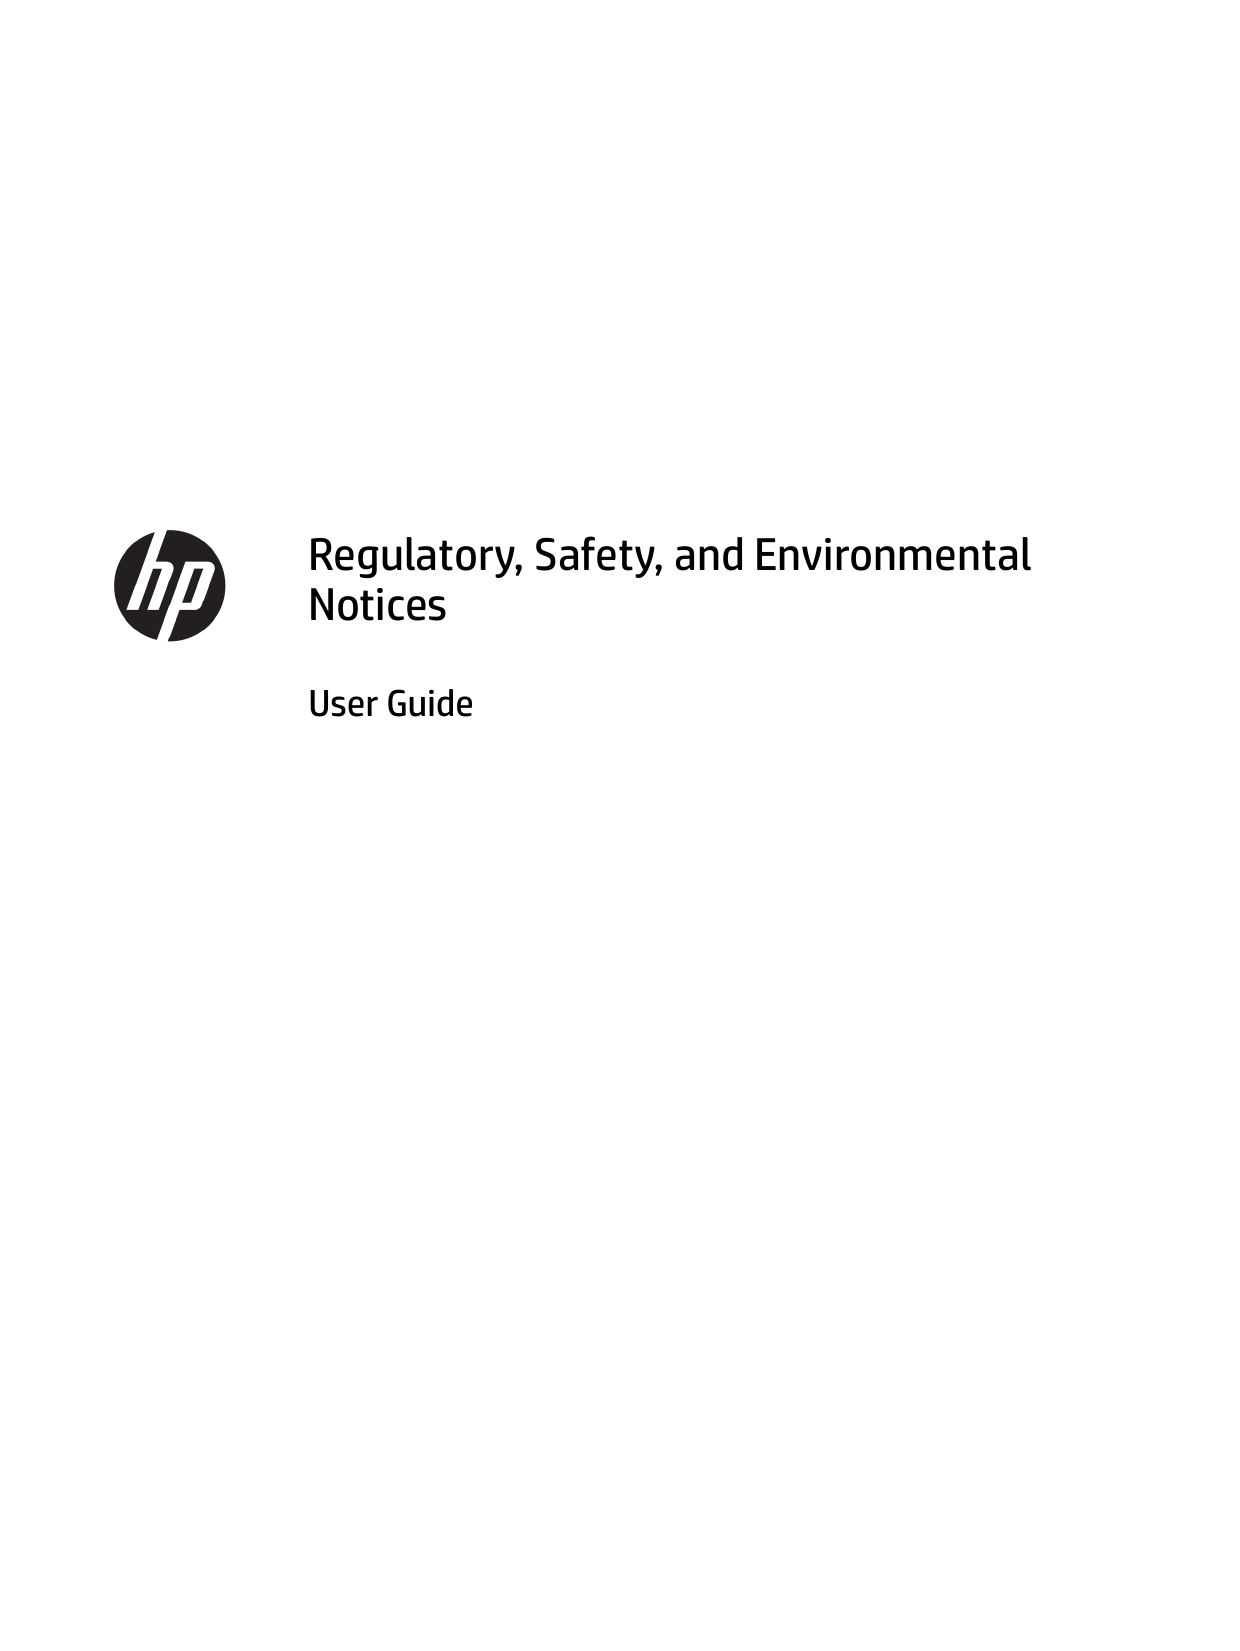 Regulatory, Safety, and Environmental NoticesUser Guide